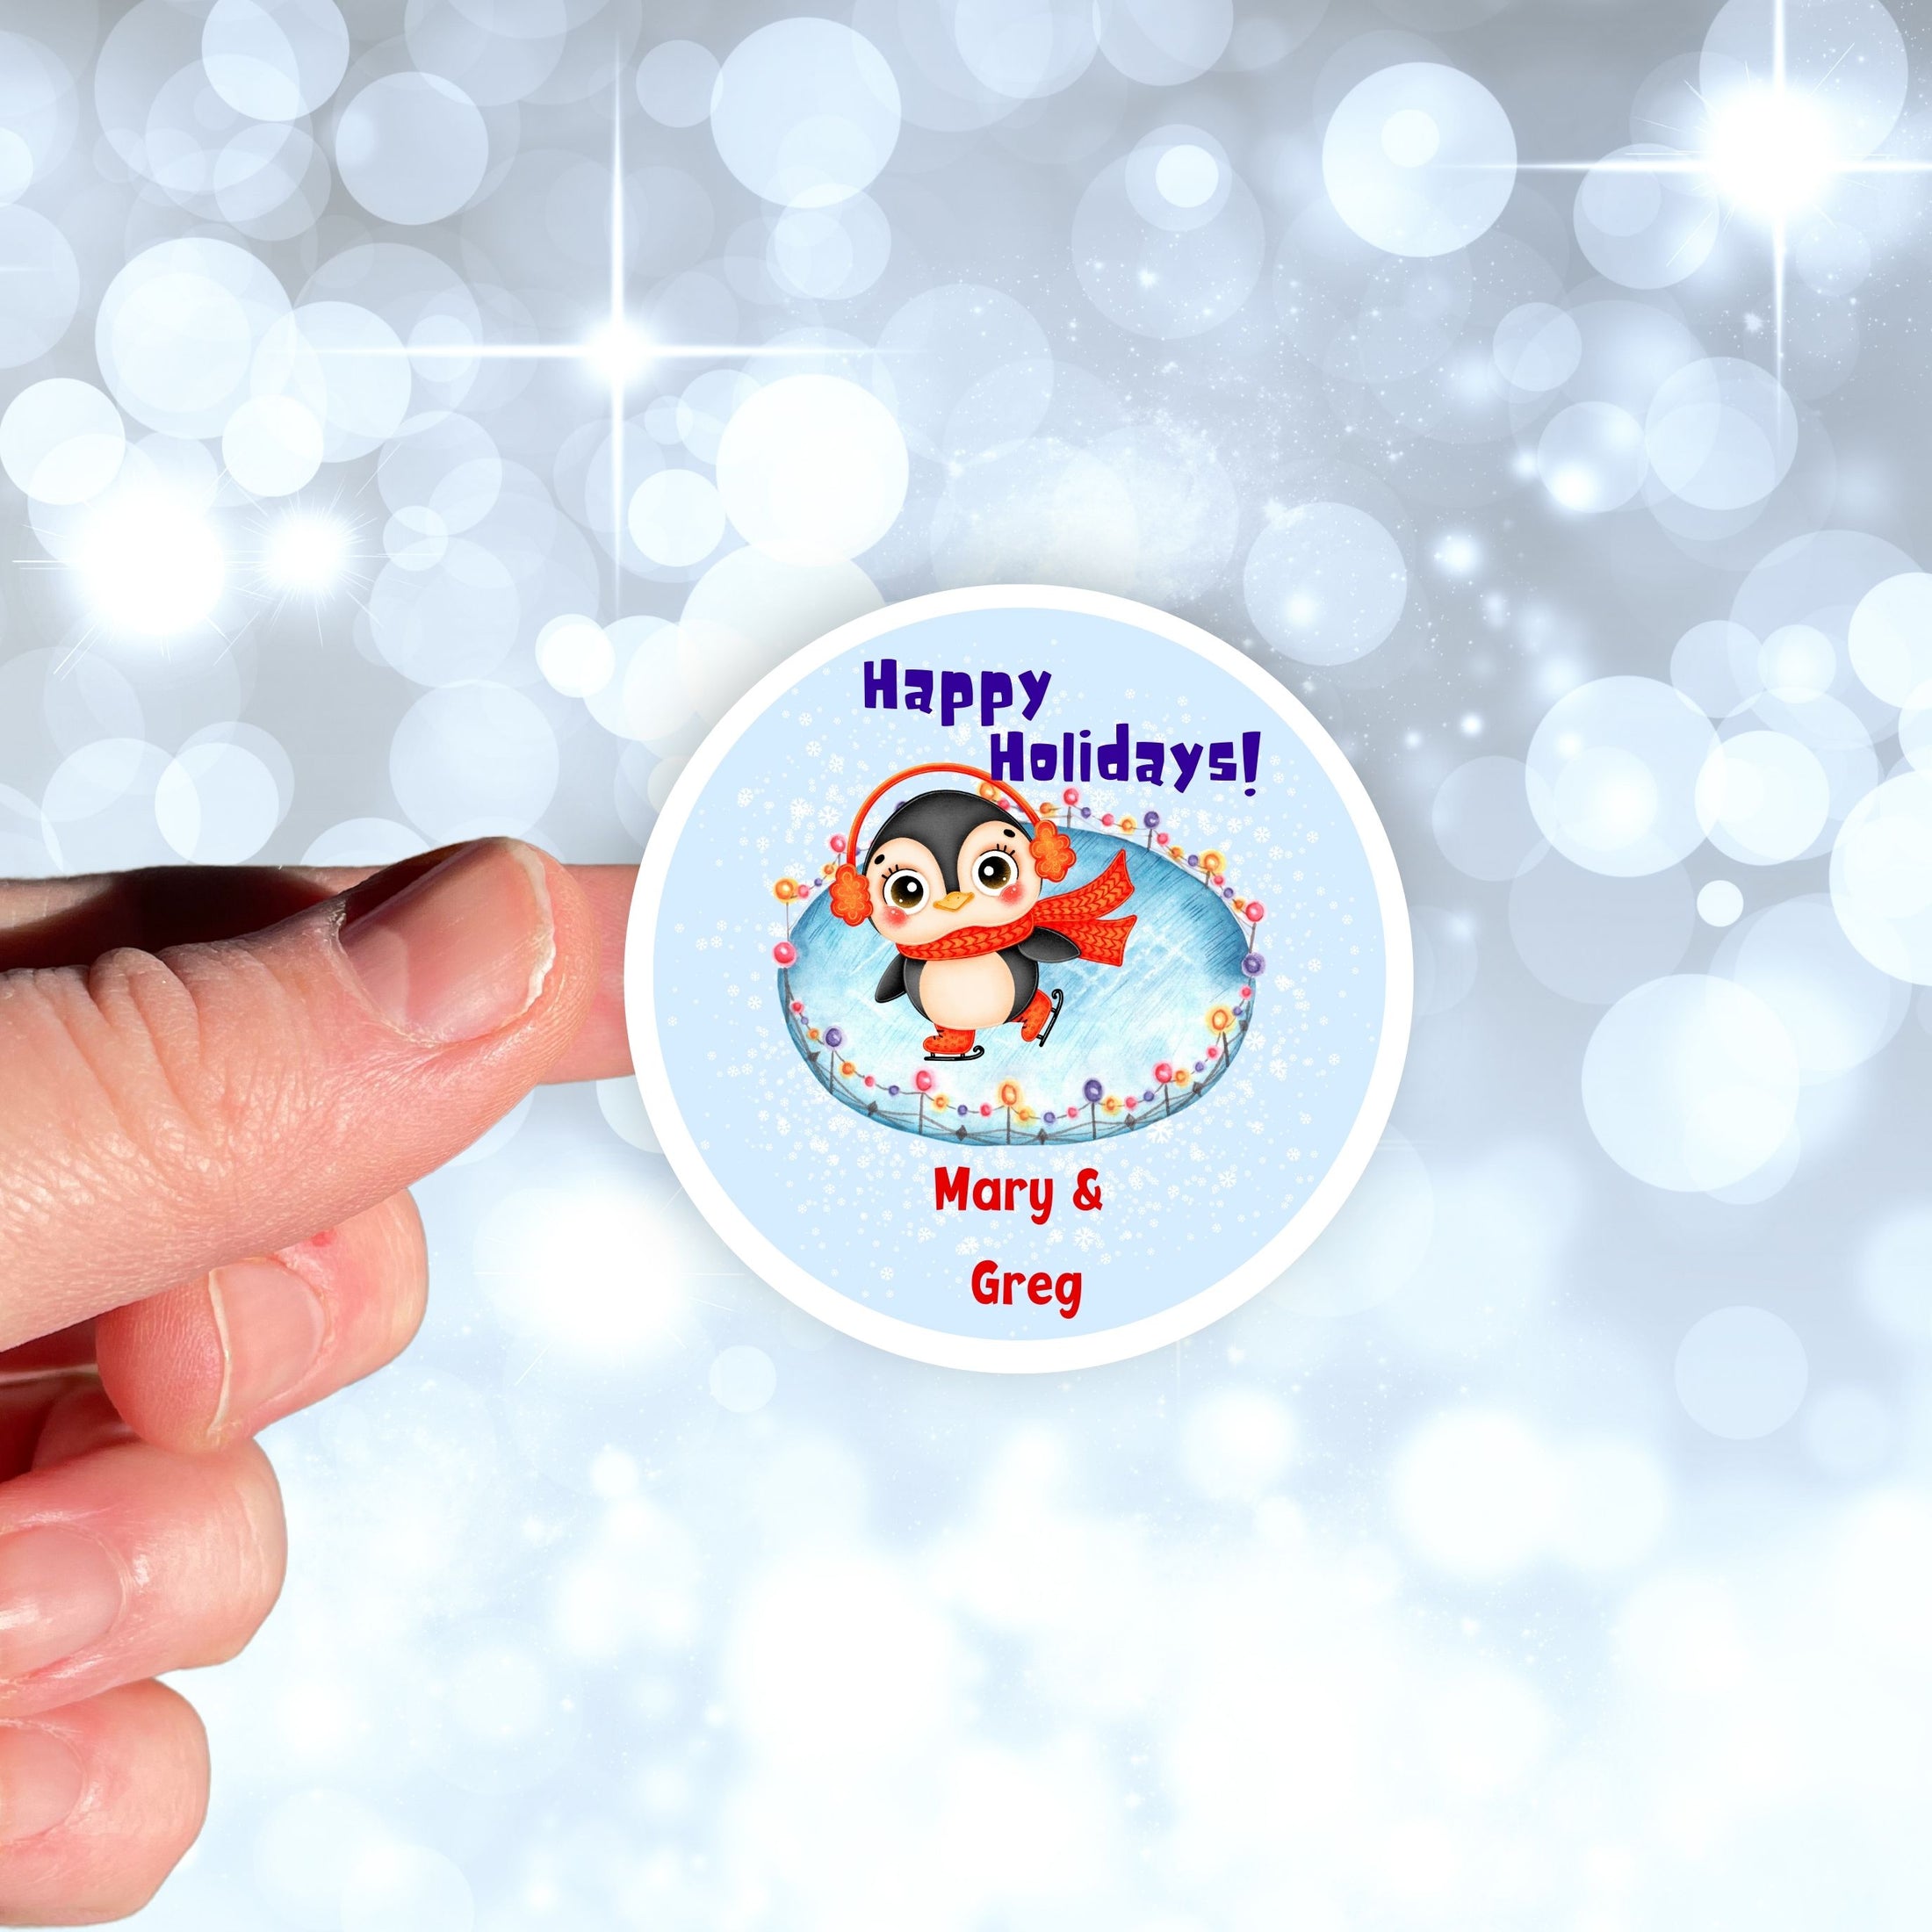 This image shows the personalized holiday sticker being held on one finger over a background of bubbles.